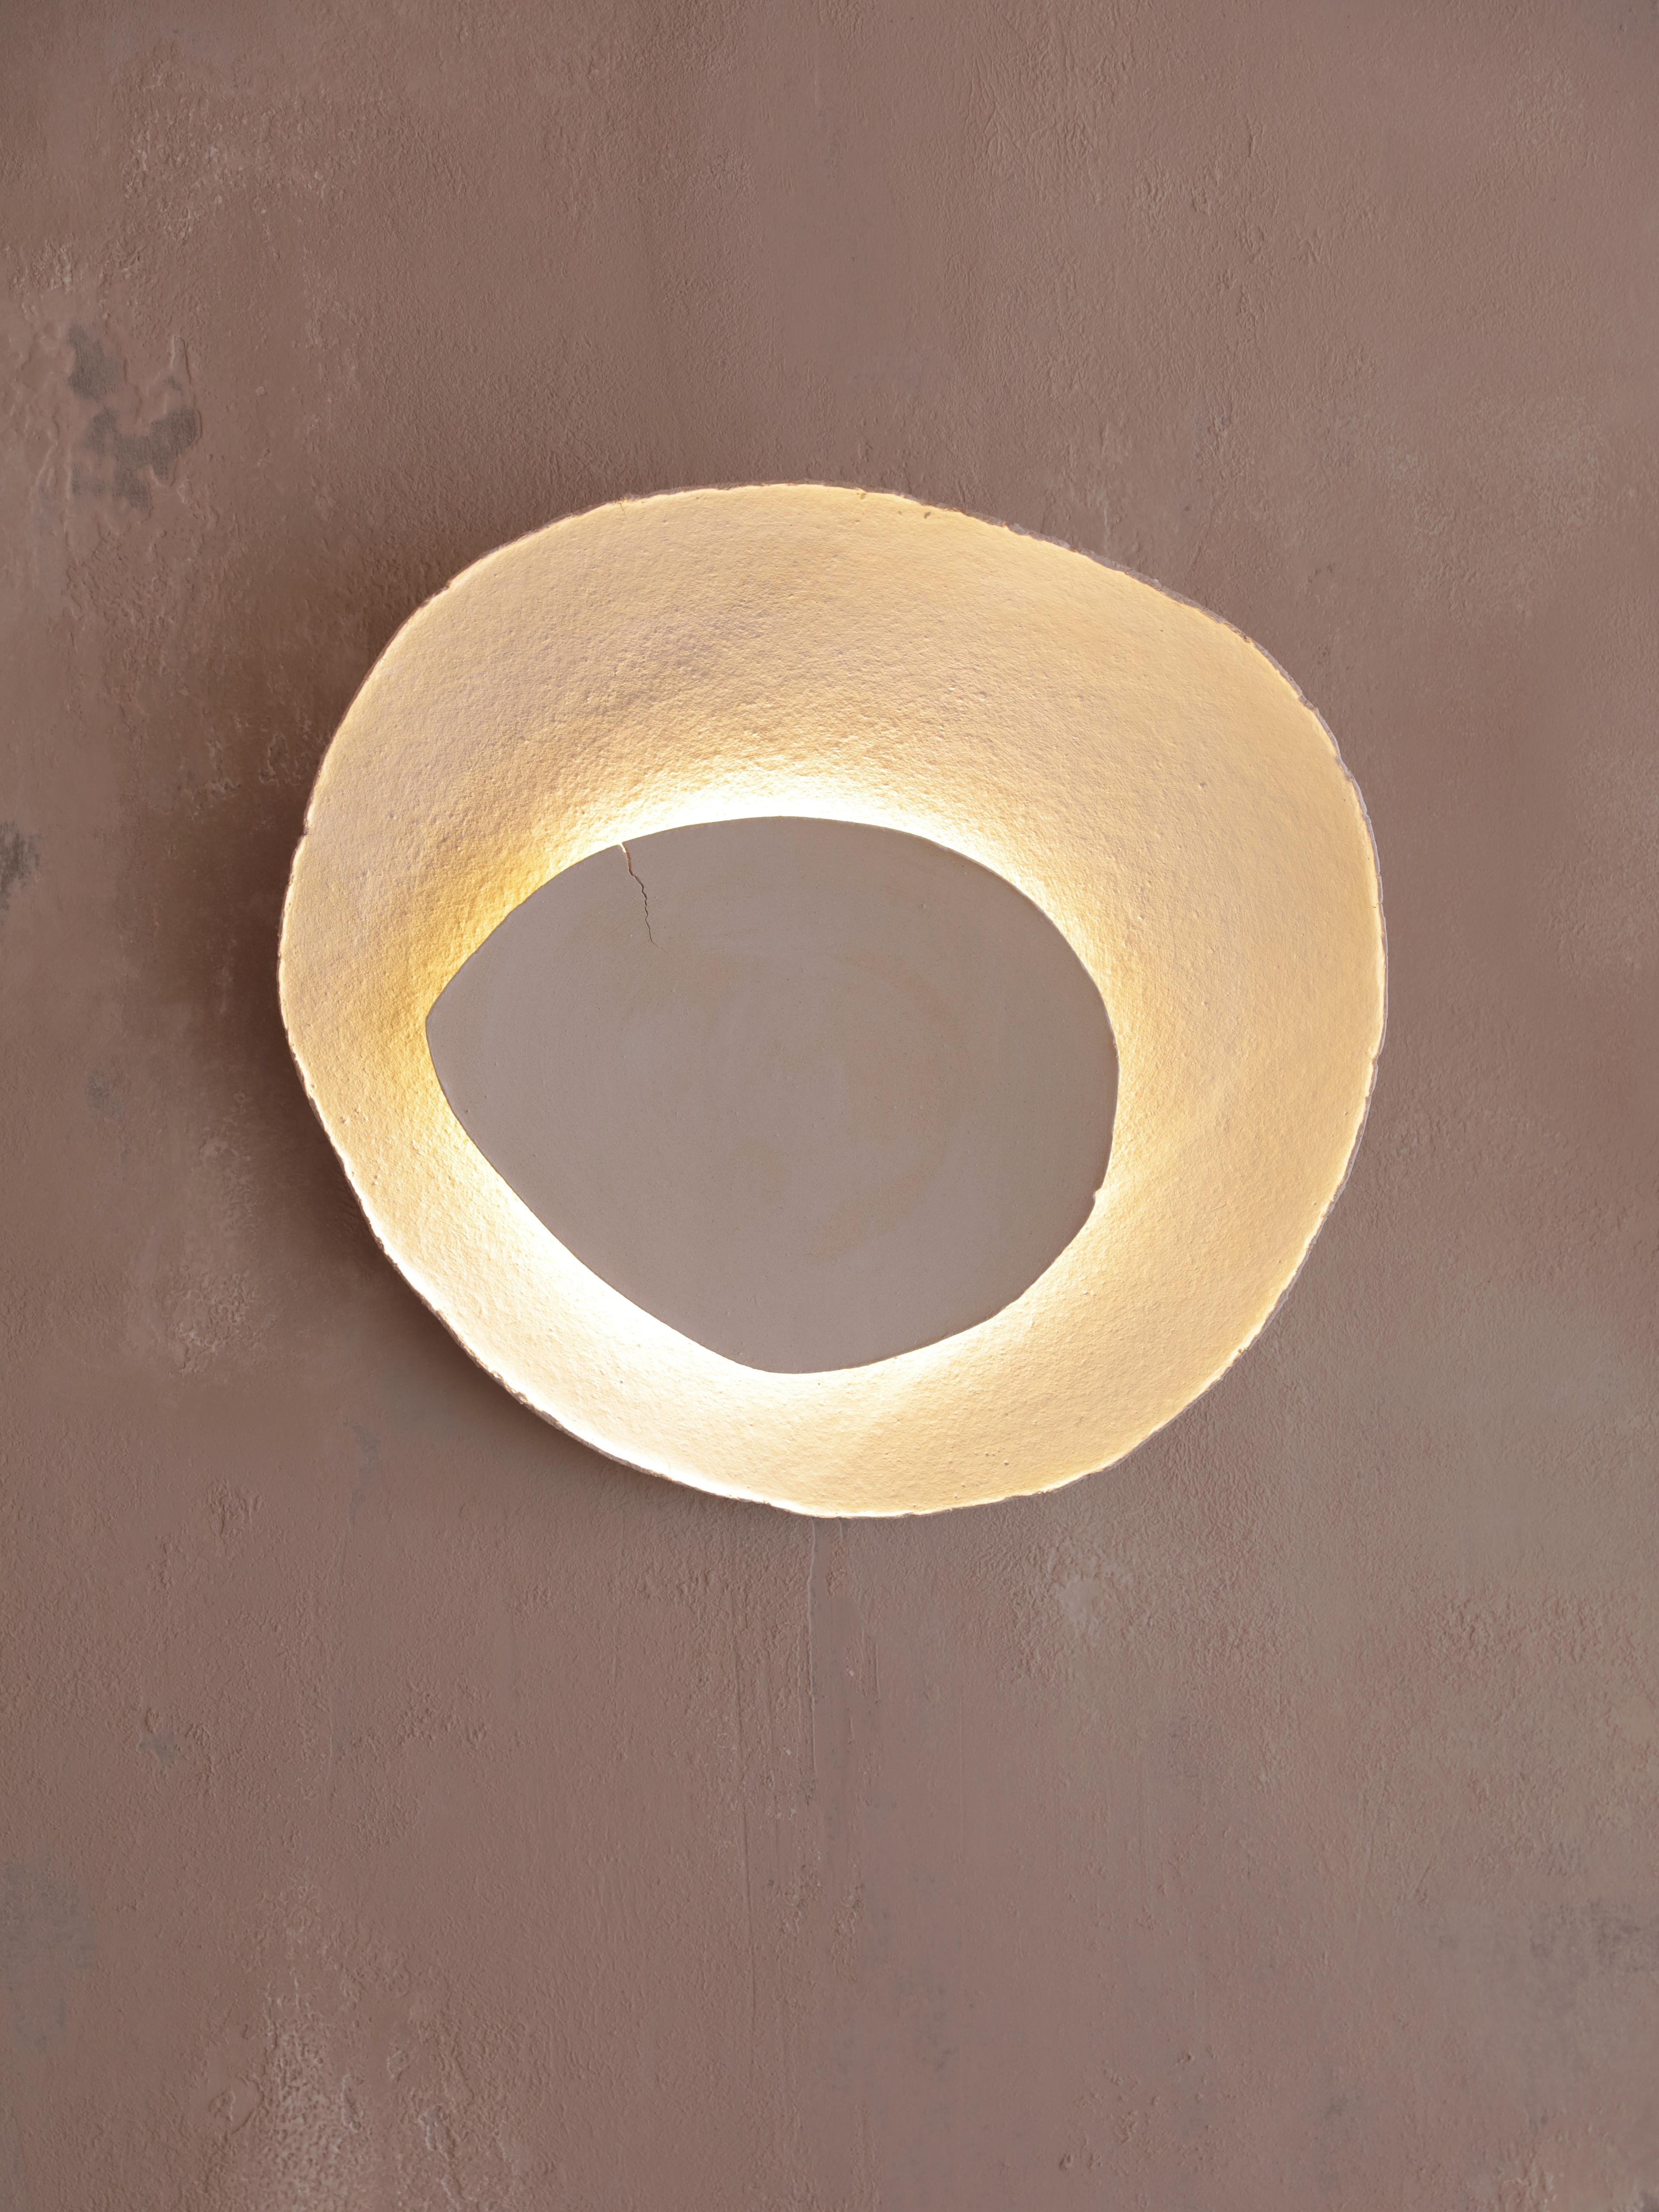 Bone #12 wall light by Margaux Leycuras
One of a Kind, Signed and numbered
Dimensions: D 6 x W 44 x H 39cm 
Material: Ceramic, sand stoneware tops with a porcelain engobe finish.
The piece is signed, numbered and delivered with a certificate of